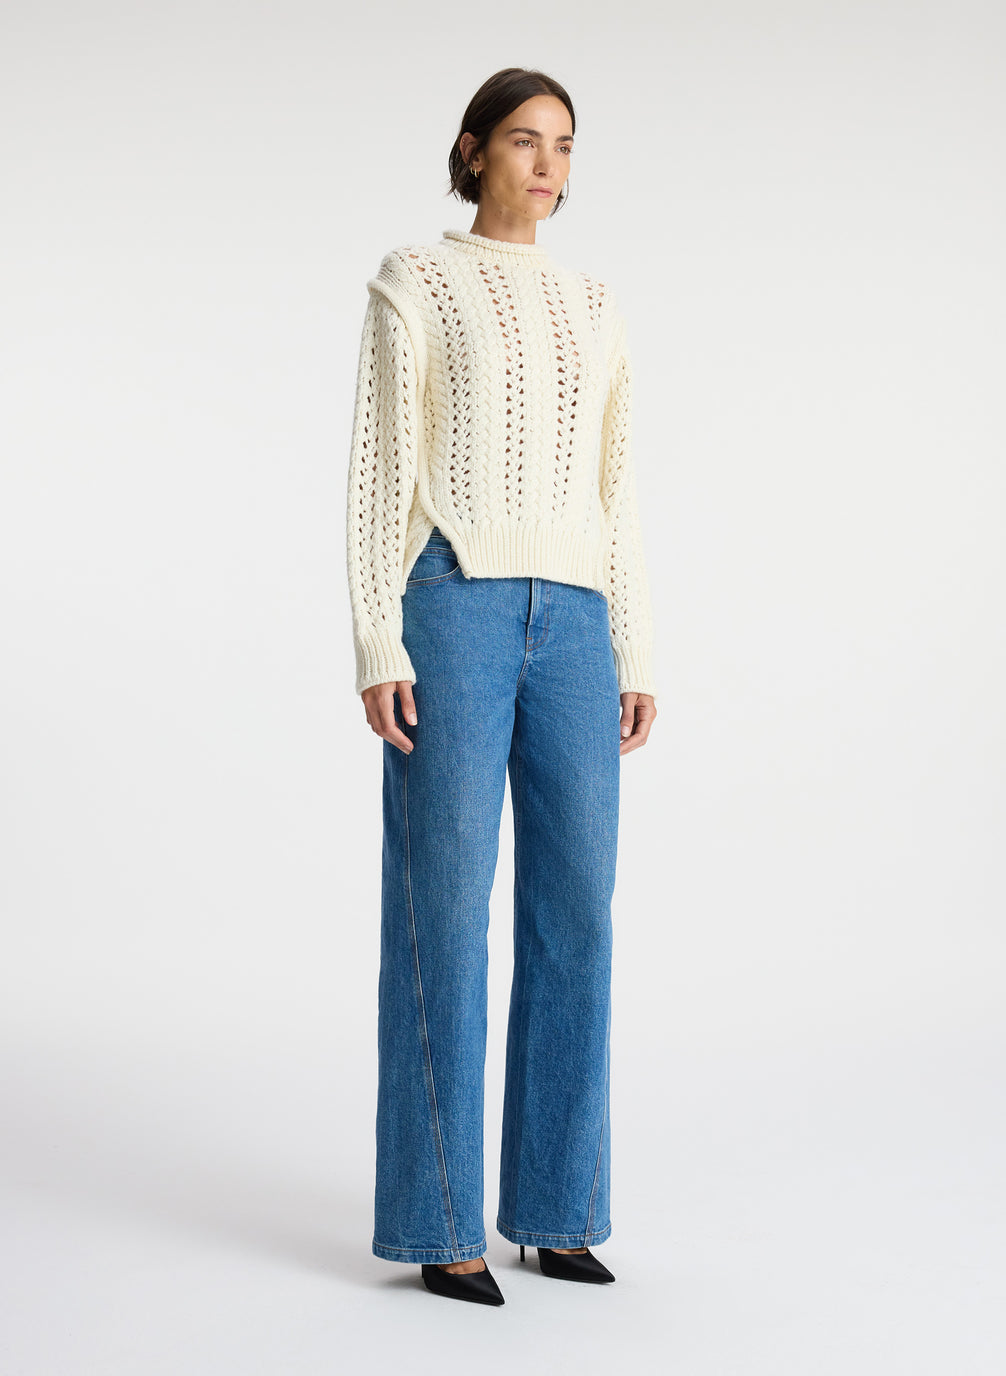 side view of woman wearing cream open knit sweater and medium wash denim jeans